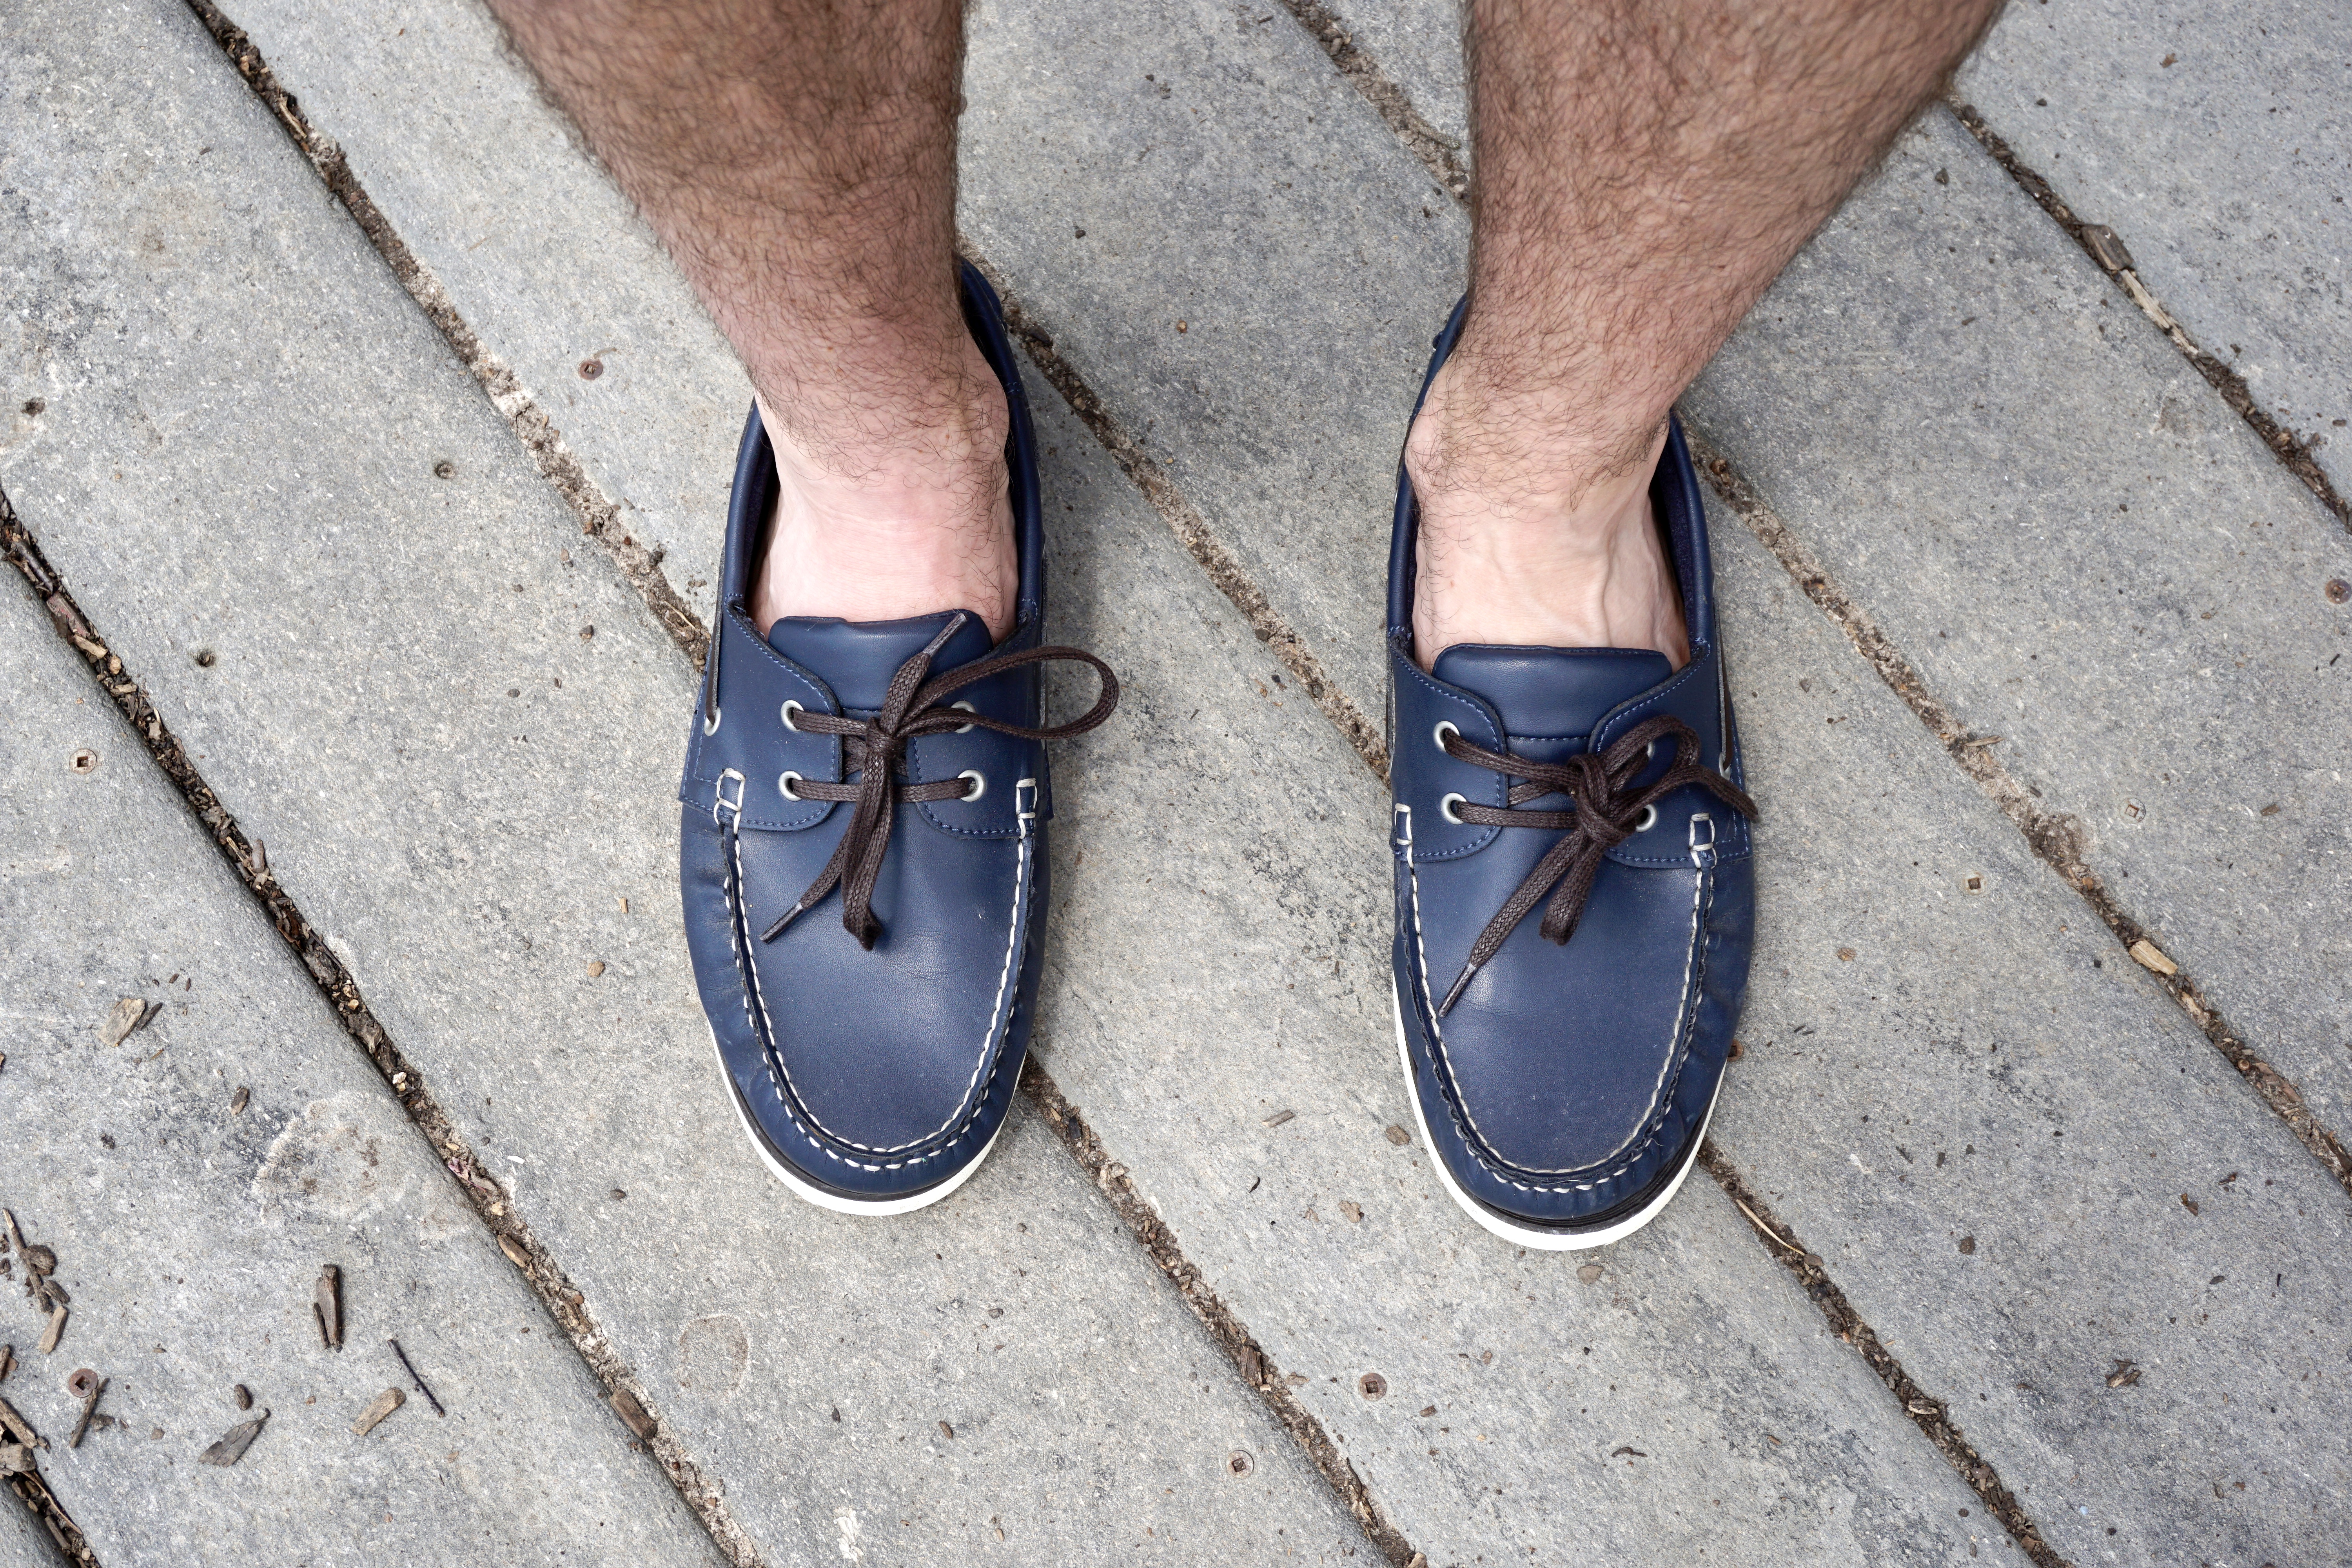 Ethically Made, Vegan, Eco-Friendly Shoes for Men